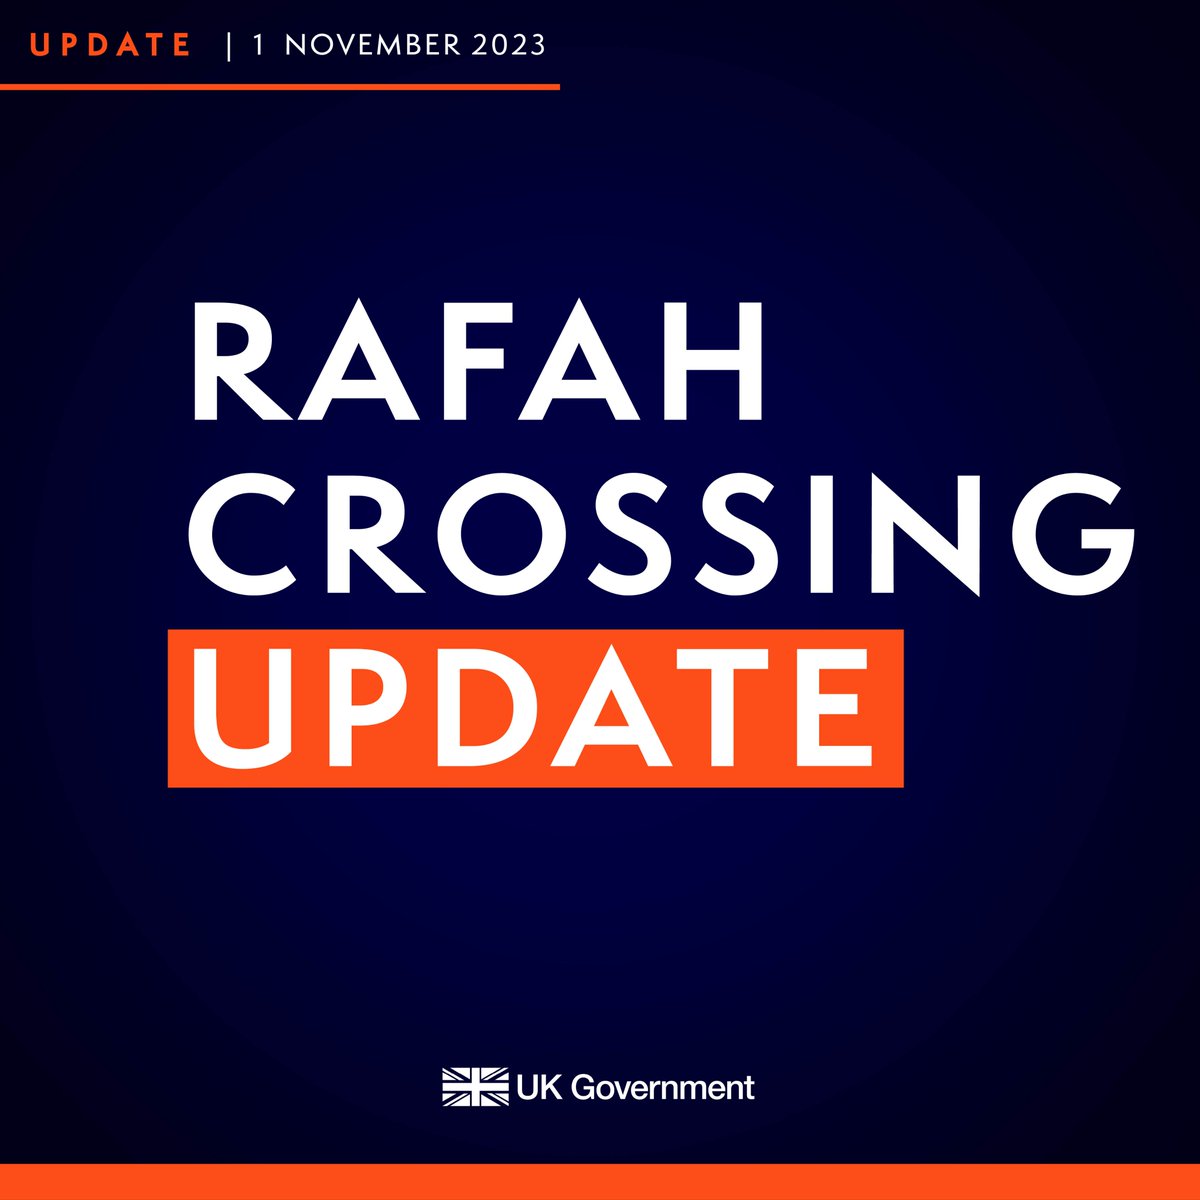 The first British nationals have crossed the Rafah border crossing from Gaza into Egypt. UK teams are on the ground providing assistance. We will continue working with partners to ensure the crossing is opened again, allowing vital aid into Gaza and more British nationals to…